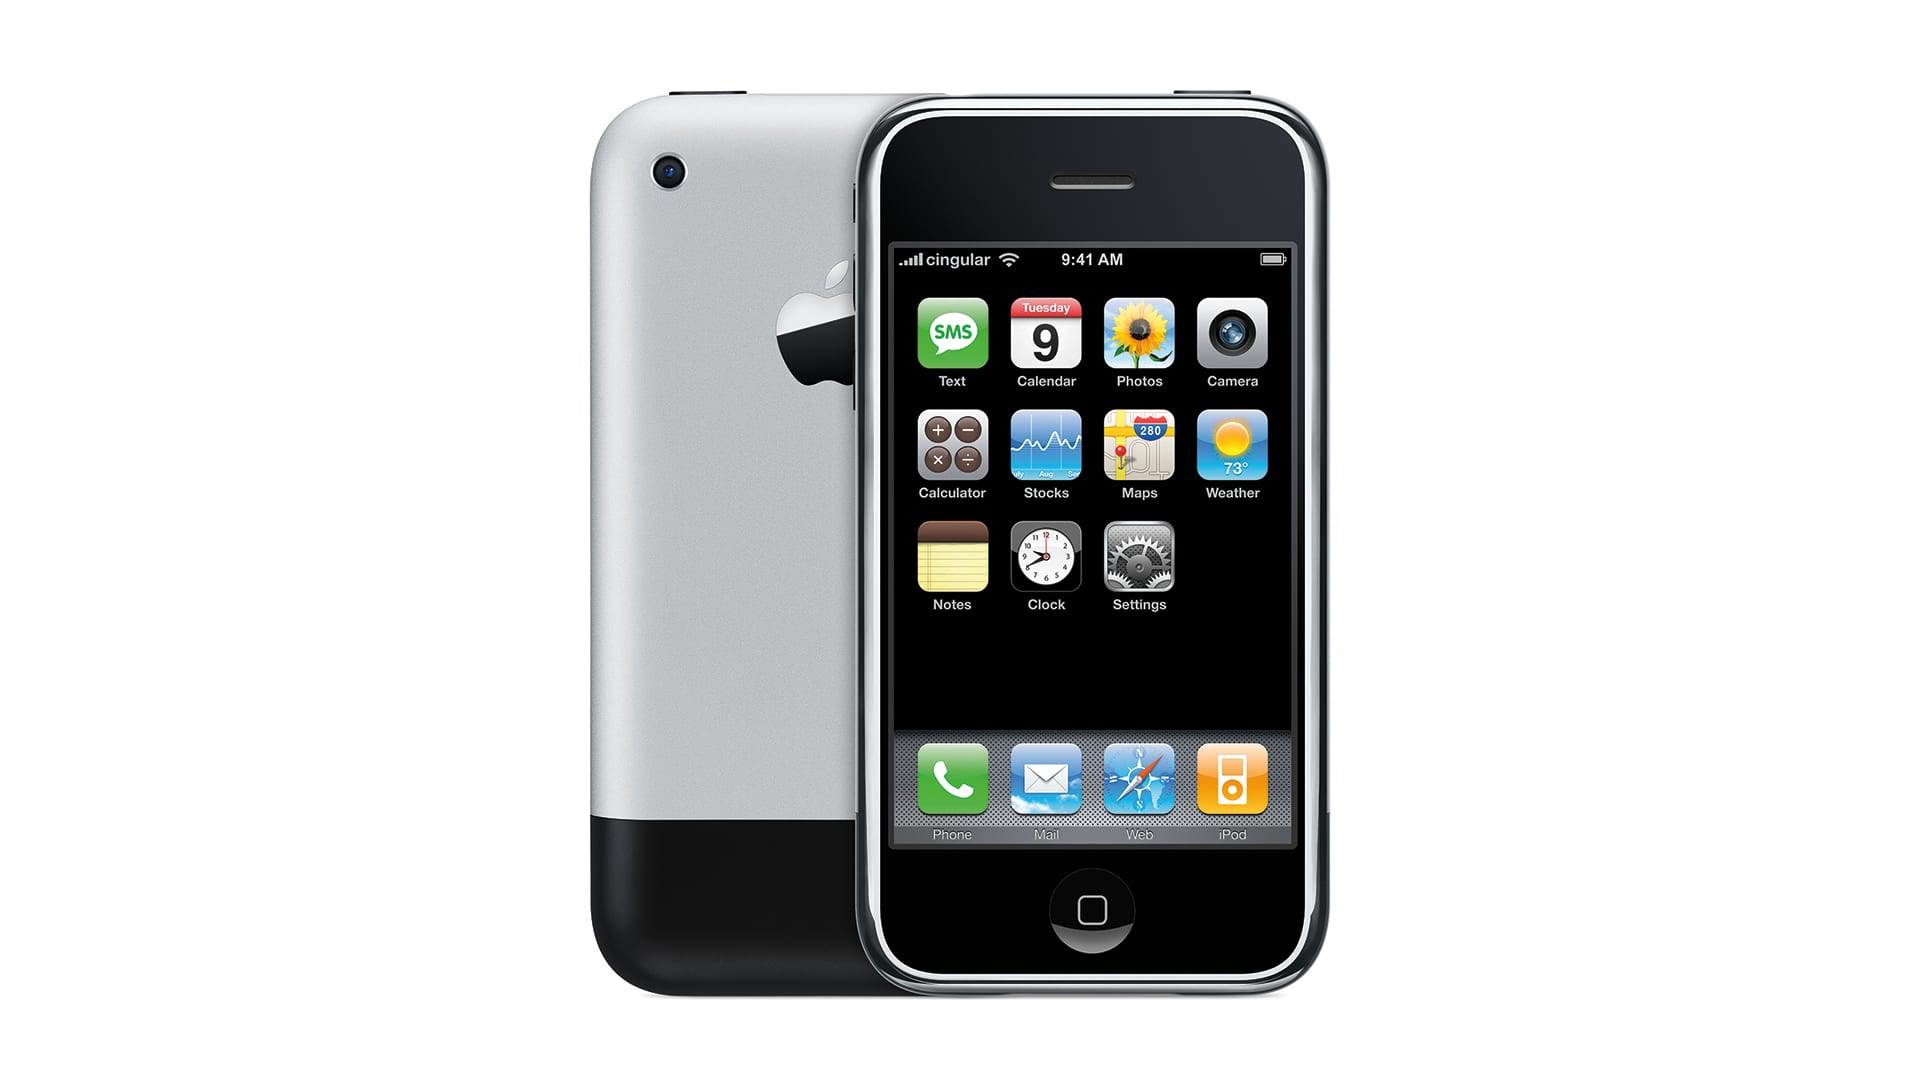 The iPhone 4 by way of Apple Offers Forward Thinking Technology 1